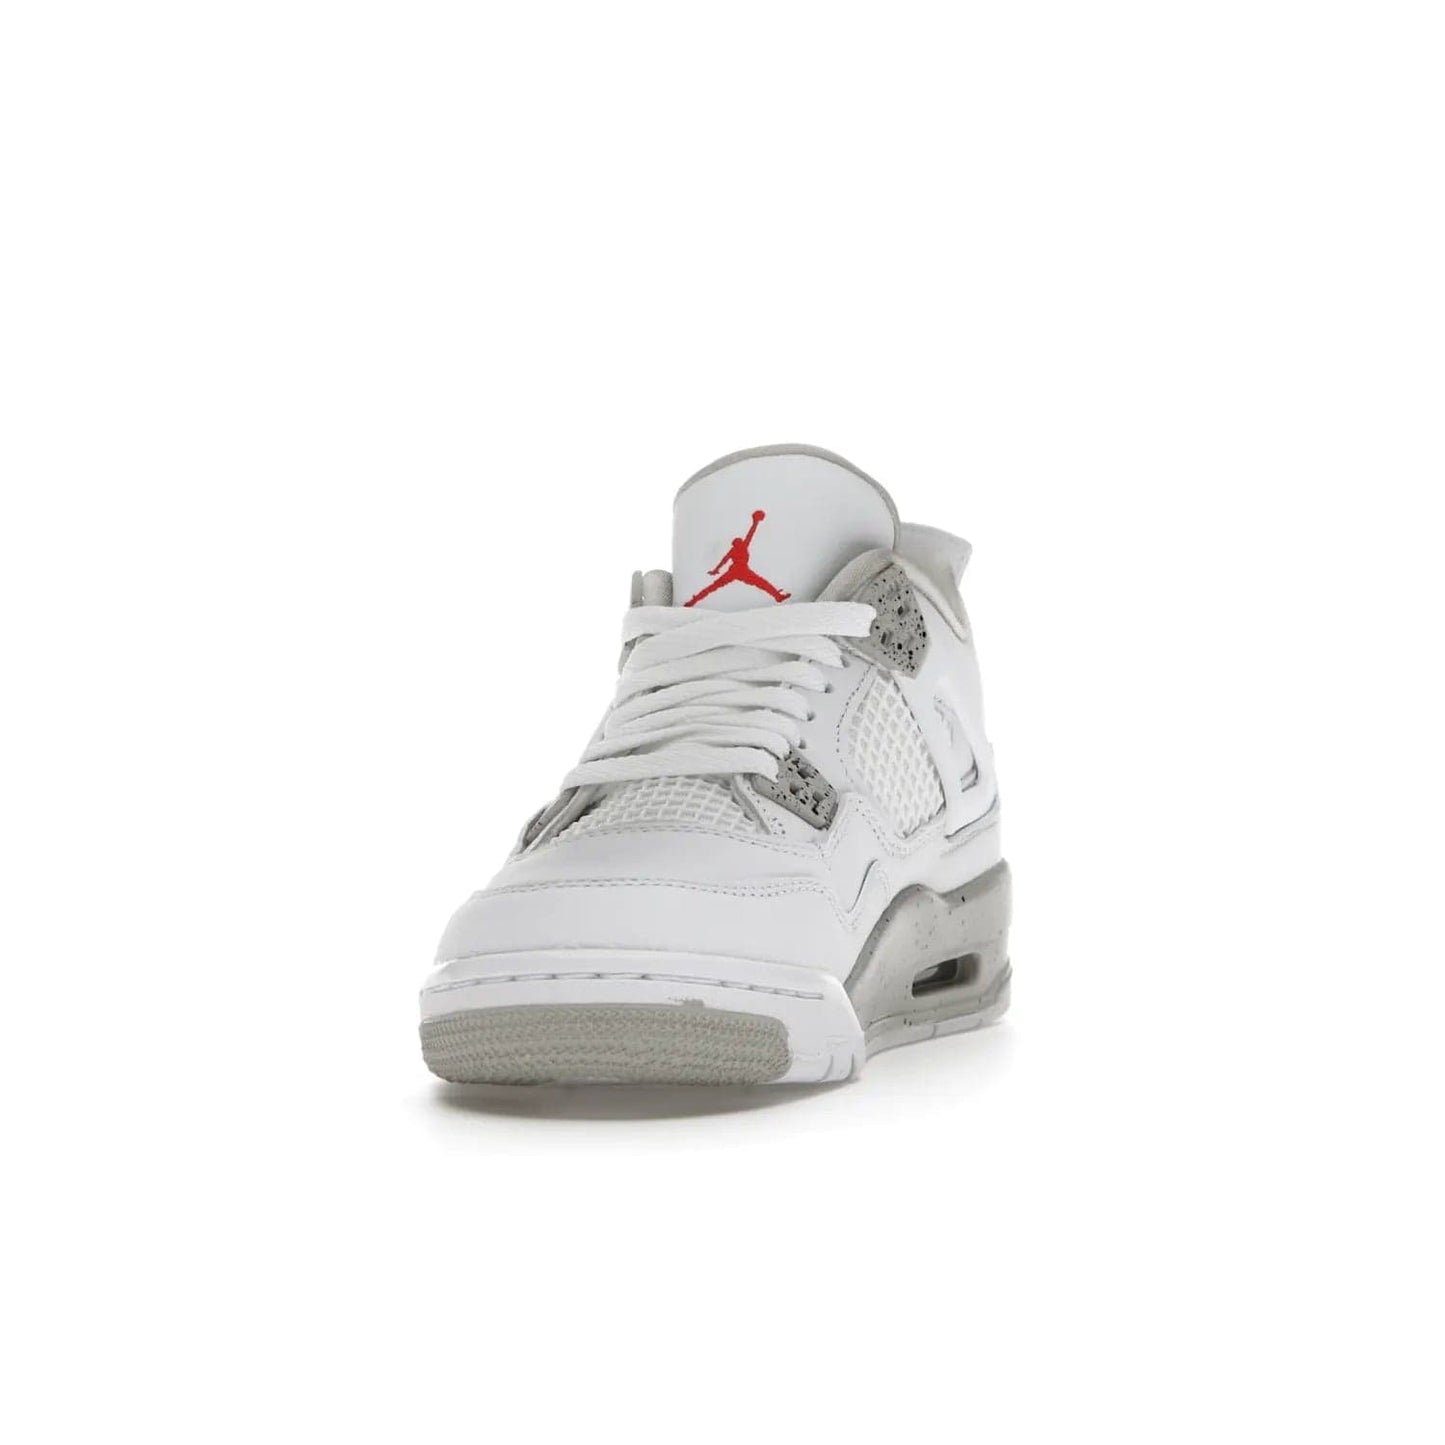 Jordan 4 Retro White Oreo (2021) (GS) - Image 12 - Only at www.BallersClubKickz.com - White Oreo Air Jordan 4 Retro 2021 GS - Iconic sneaker silhouette with white canvas upper, Tech Grey detailing, and Fire Red accents. Available July 2021.